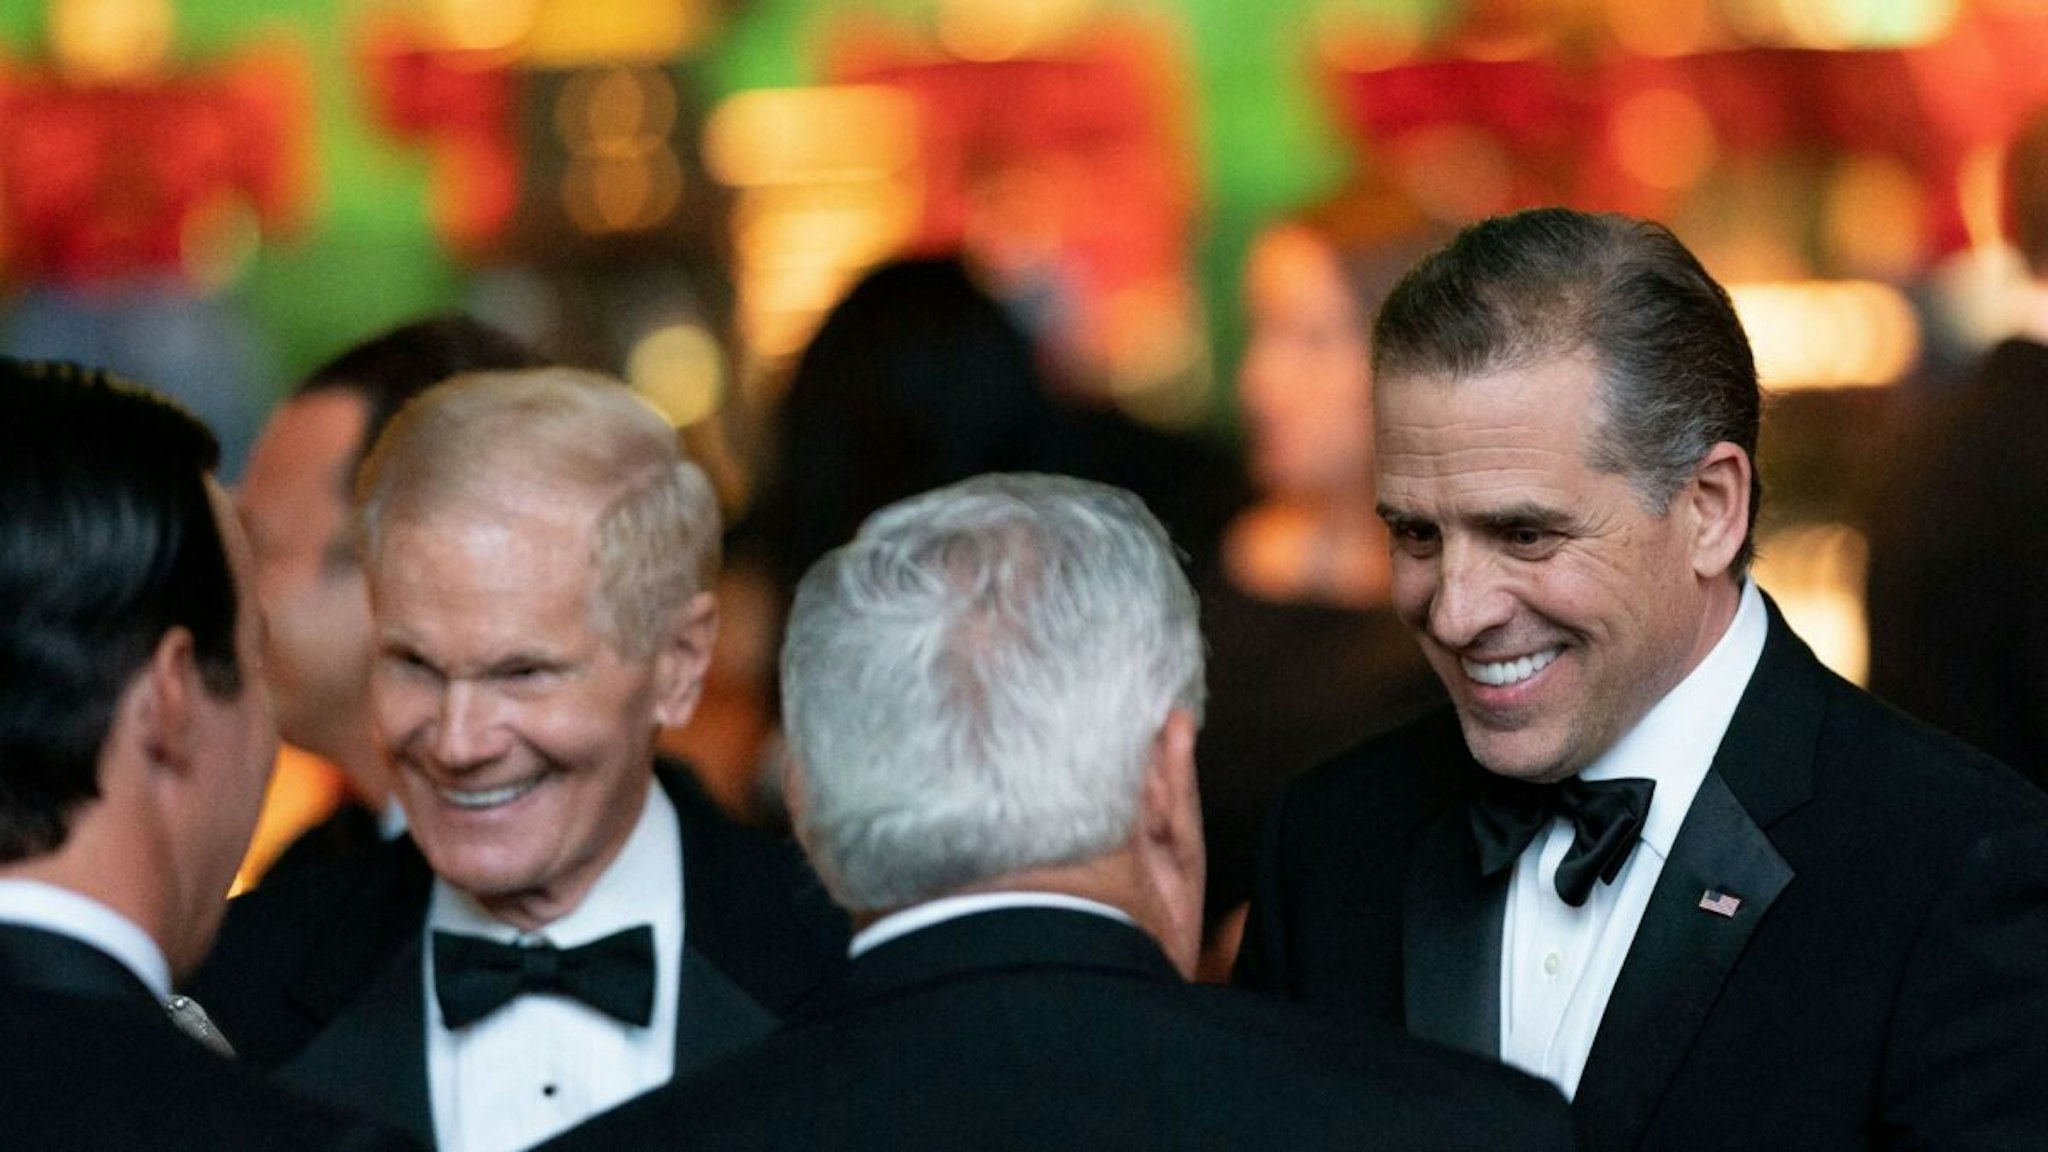 NASA Administrator Bill Nelson (L) and Hunter Biden (R) arrive for a toast during an official State Dinner in honor of India's Prime Minister Narendra Modi, at the White House in Washington, DC, on June 22, 2023.